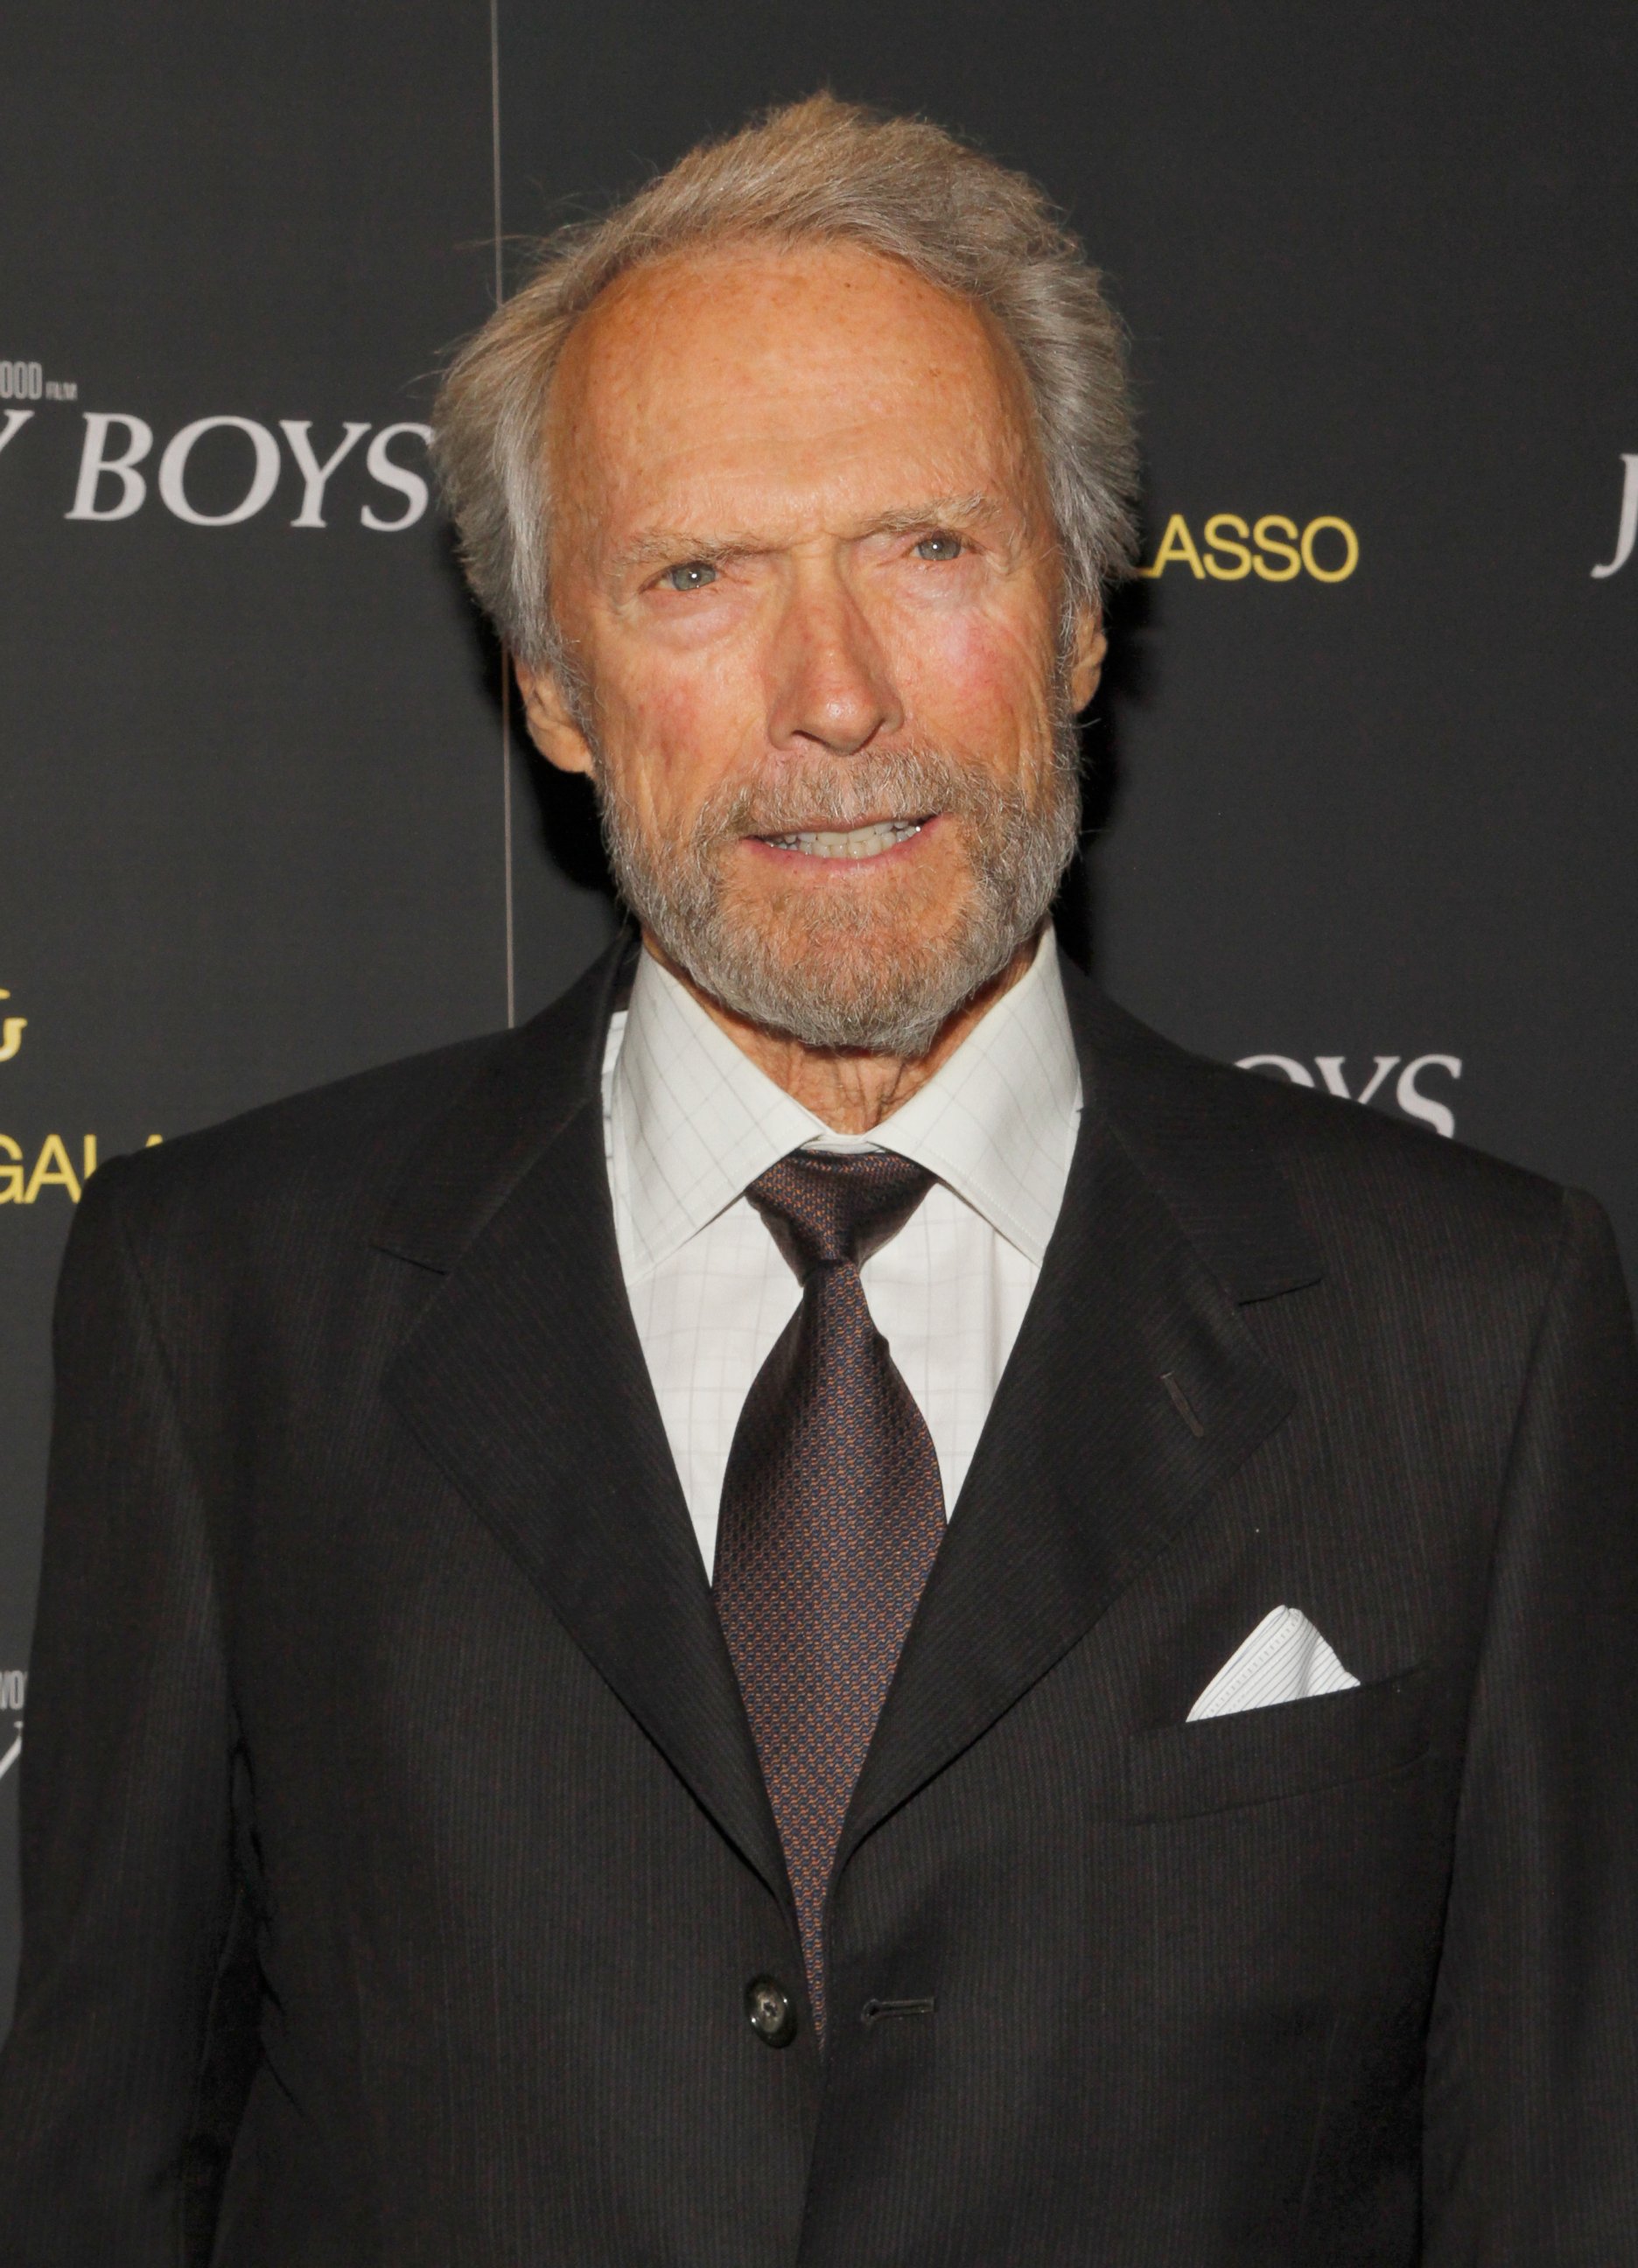 PHOTO: Clint Eastwood attends the "Jersey Boys" Special Screening dinner at Angelo Galasso House on June 9, 2014 in New York City.   